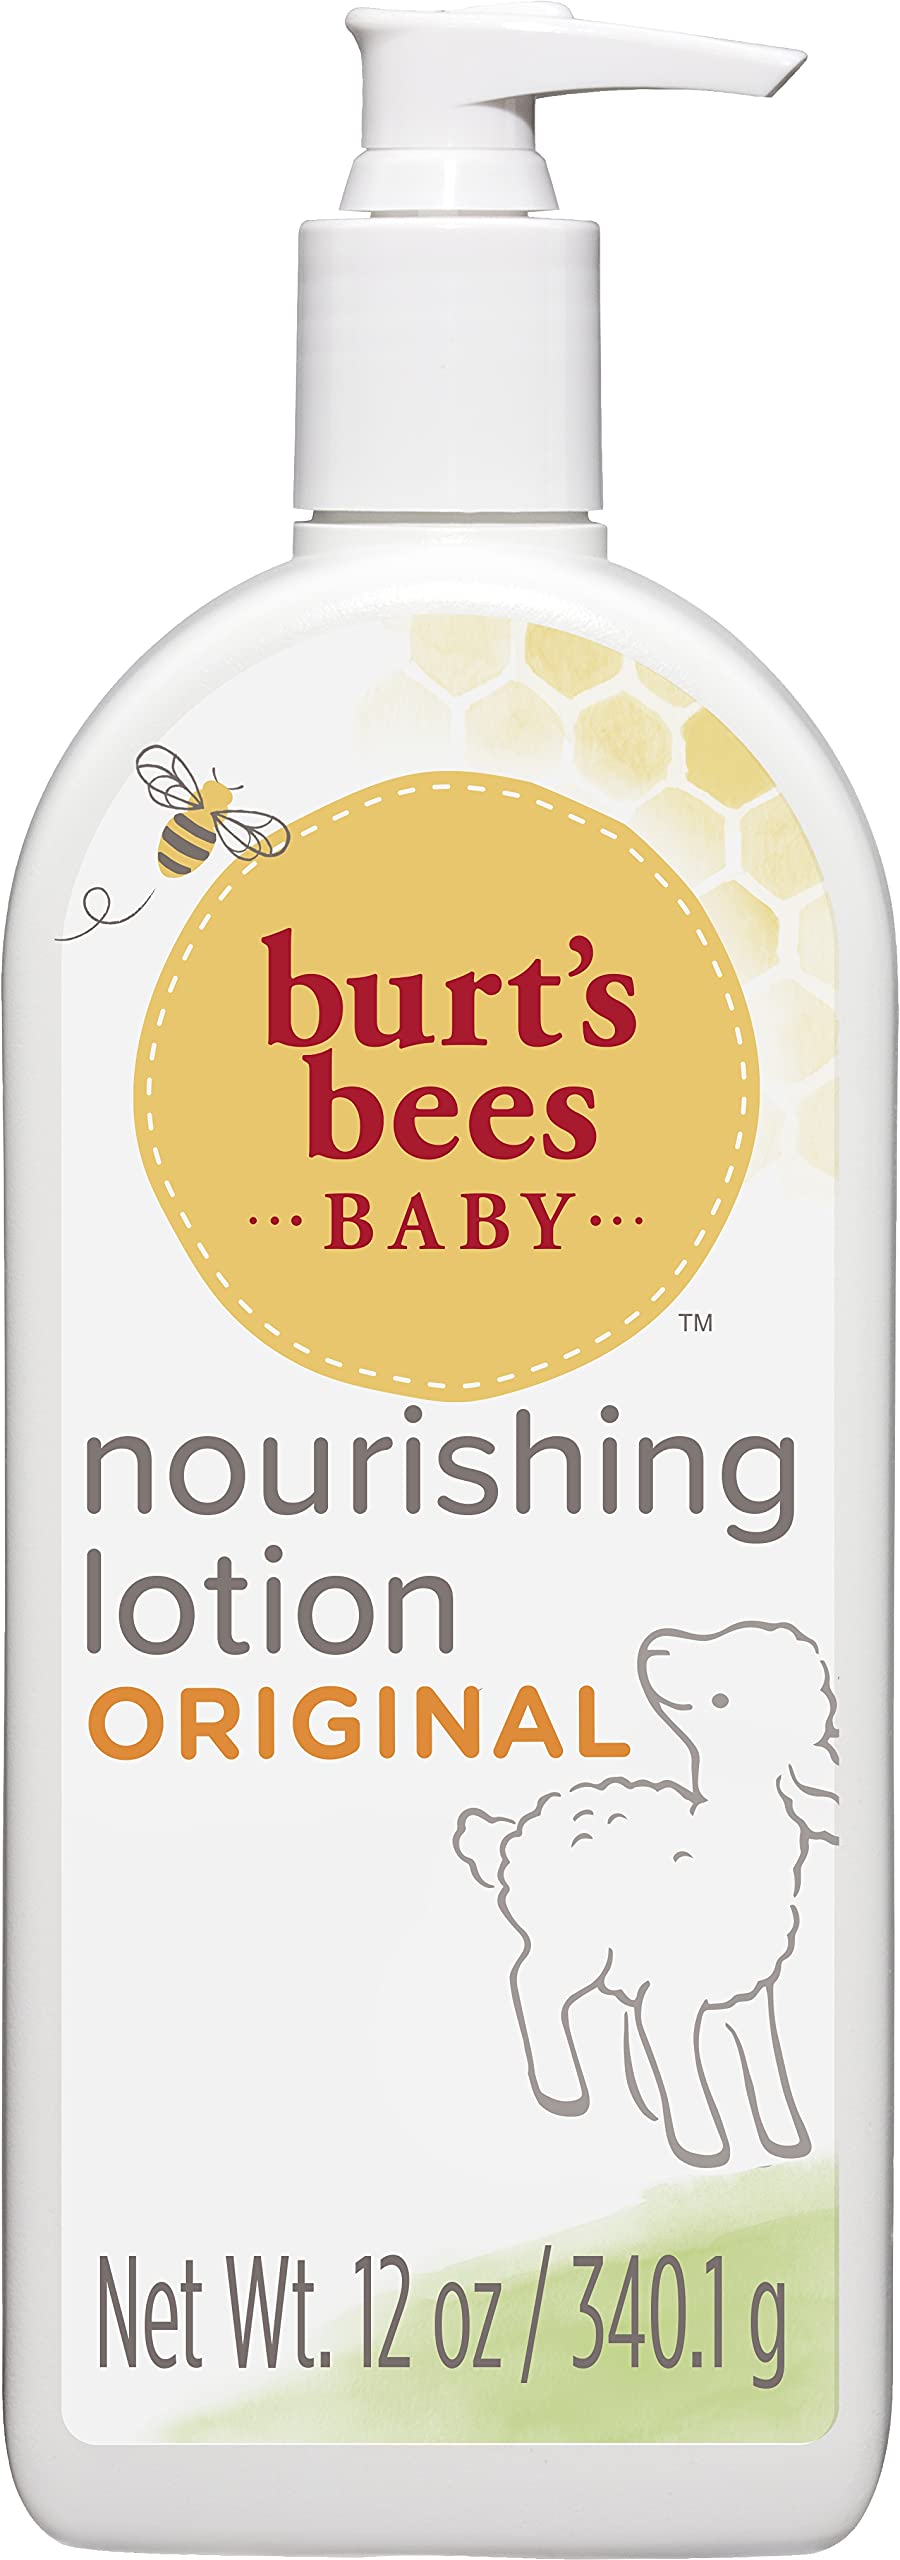 Burt's Bees Baby Lotion for Sensitive Skin, Original Scent, 12 Ounce $3.79 or less + FS w/ S&S